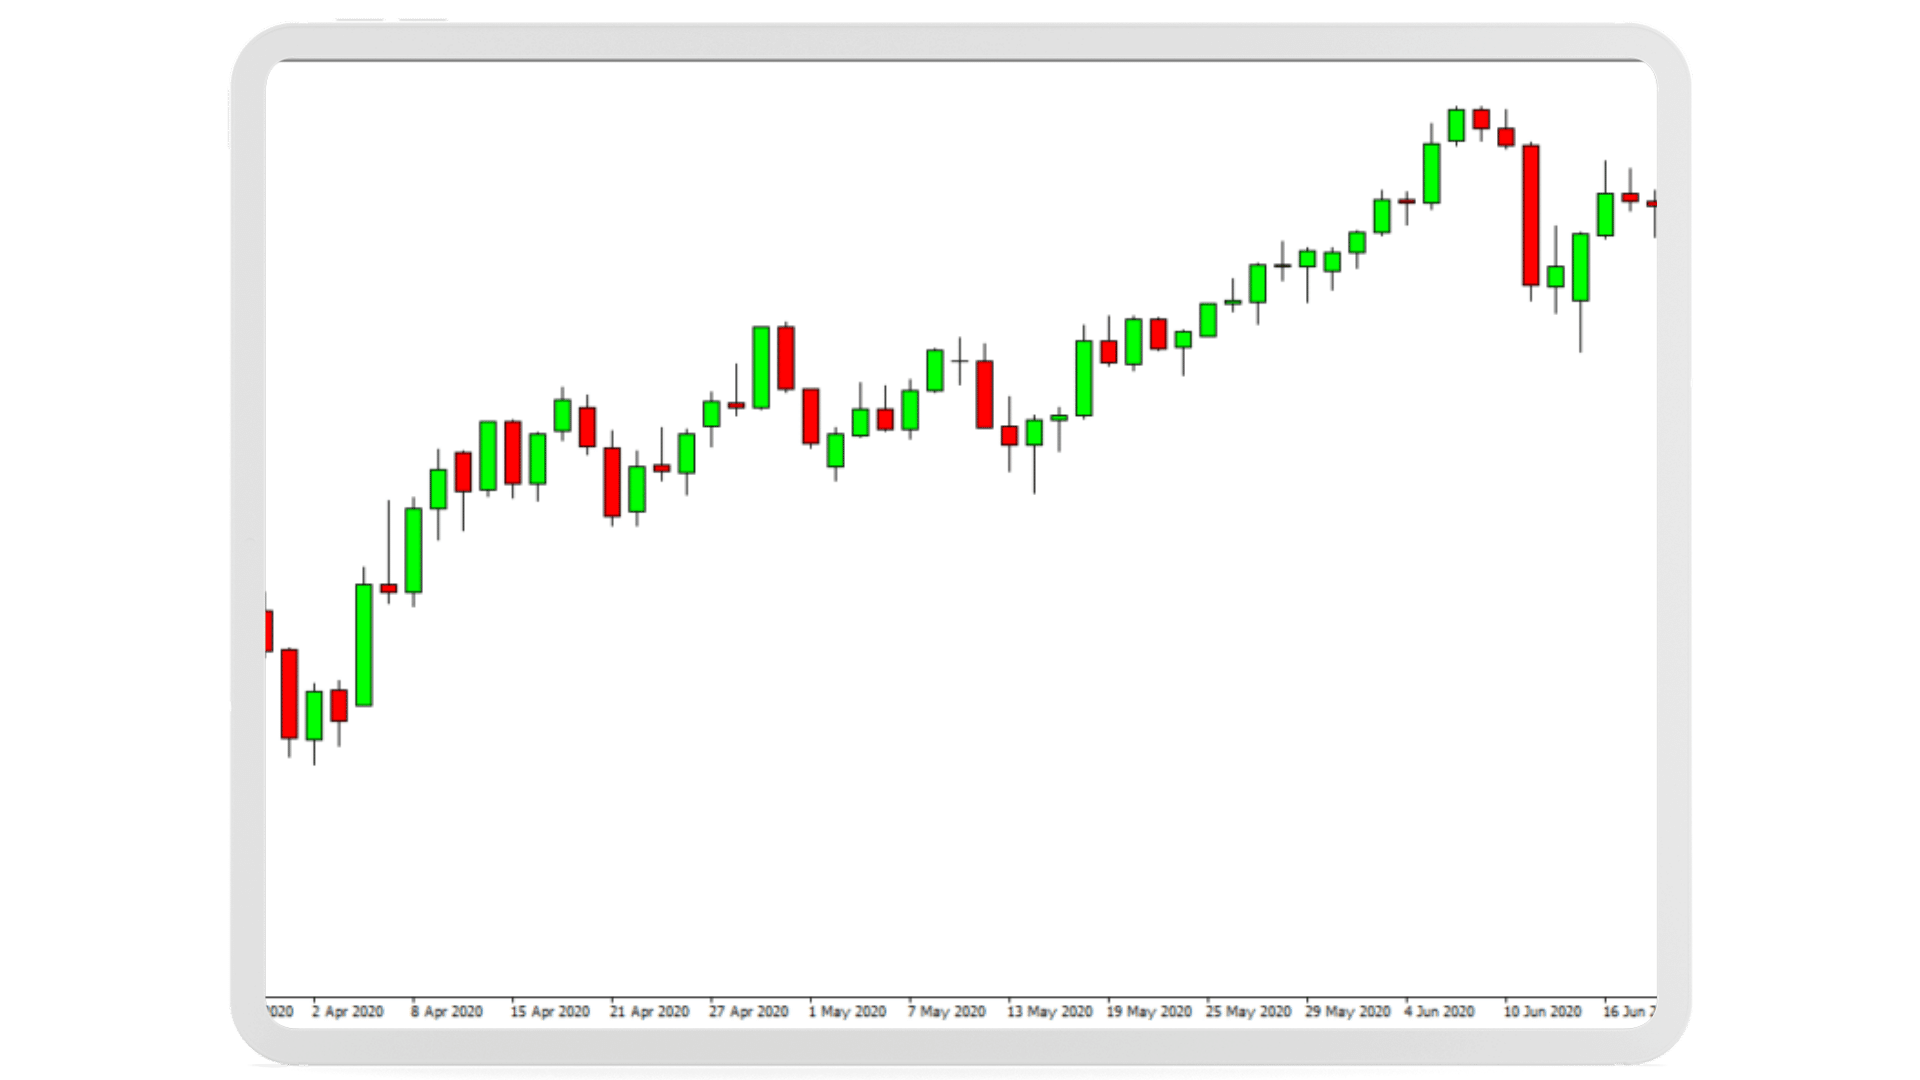 A candlestick chart pattern showing the stock price opening lower and closing higher.